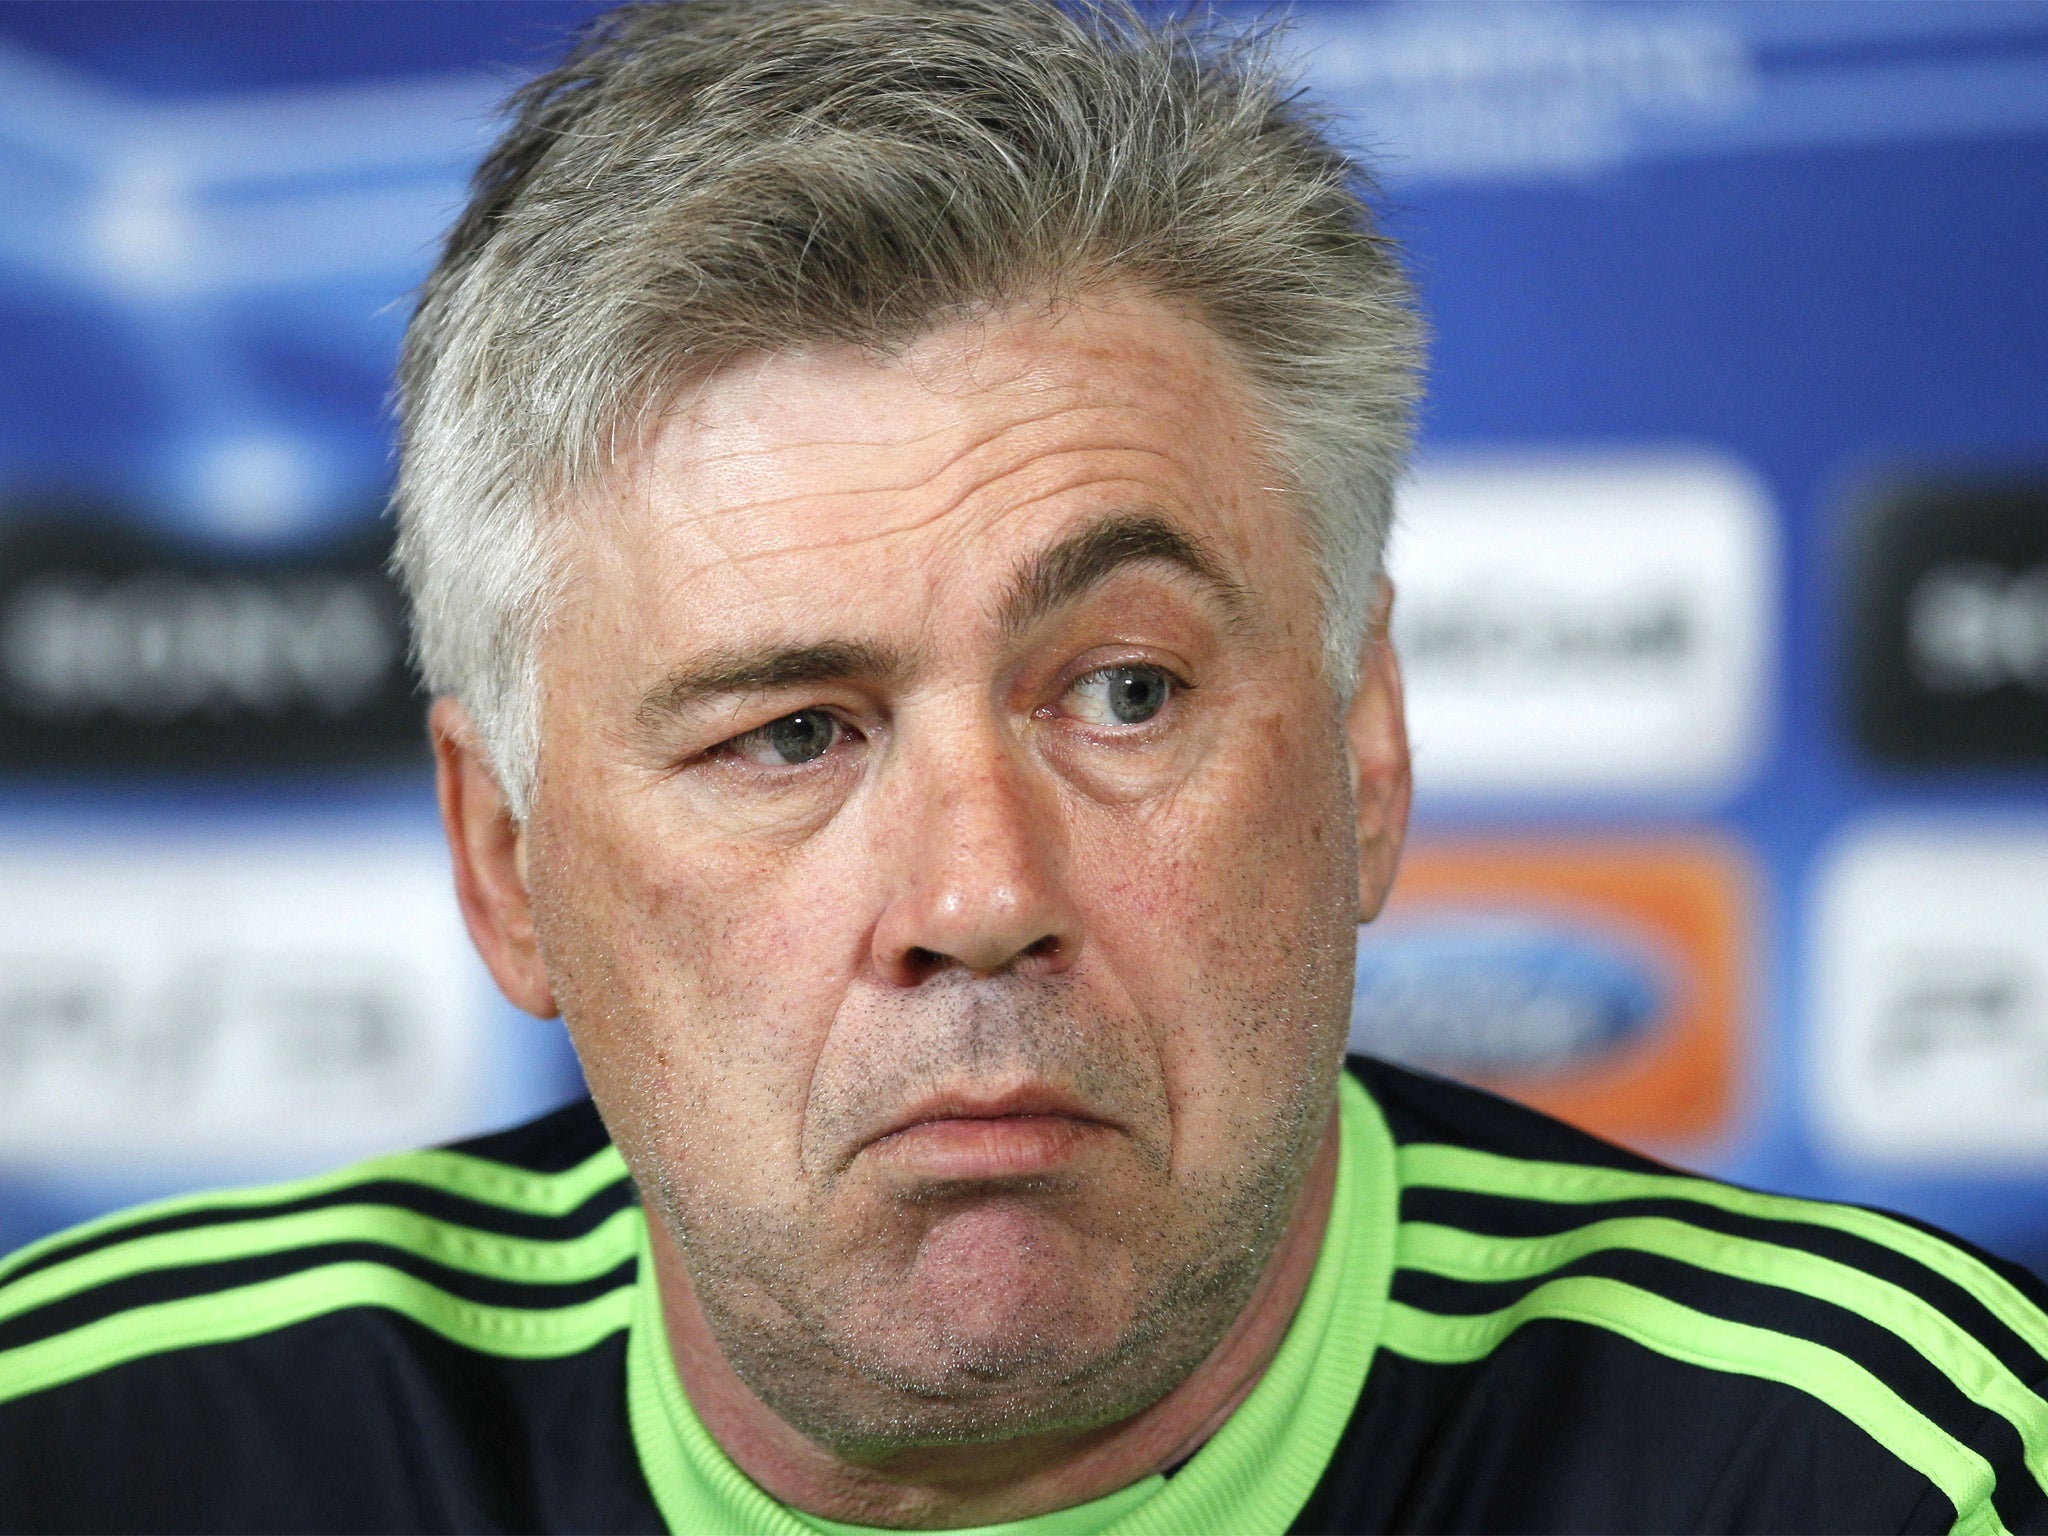 Carlos Ancelotti lasted nearly two years in the hot seat